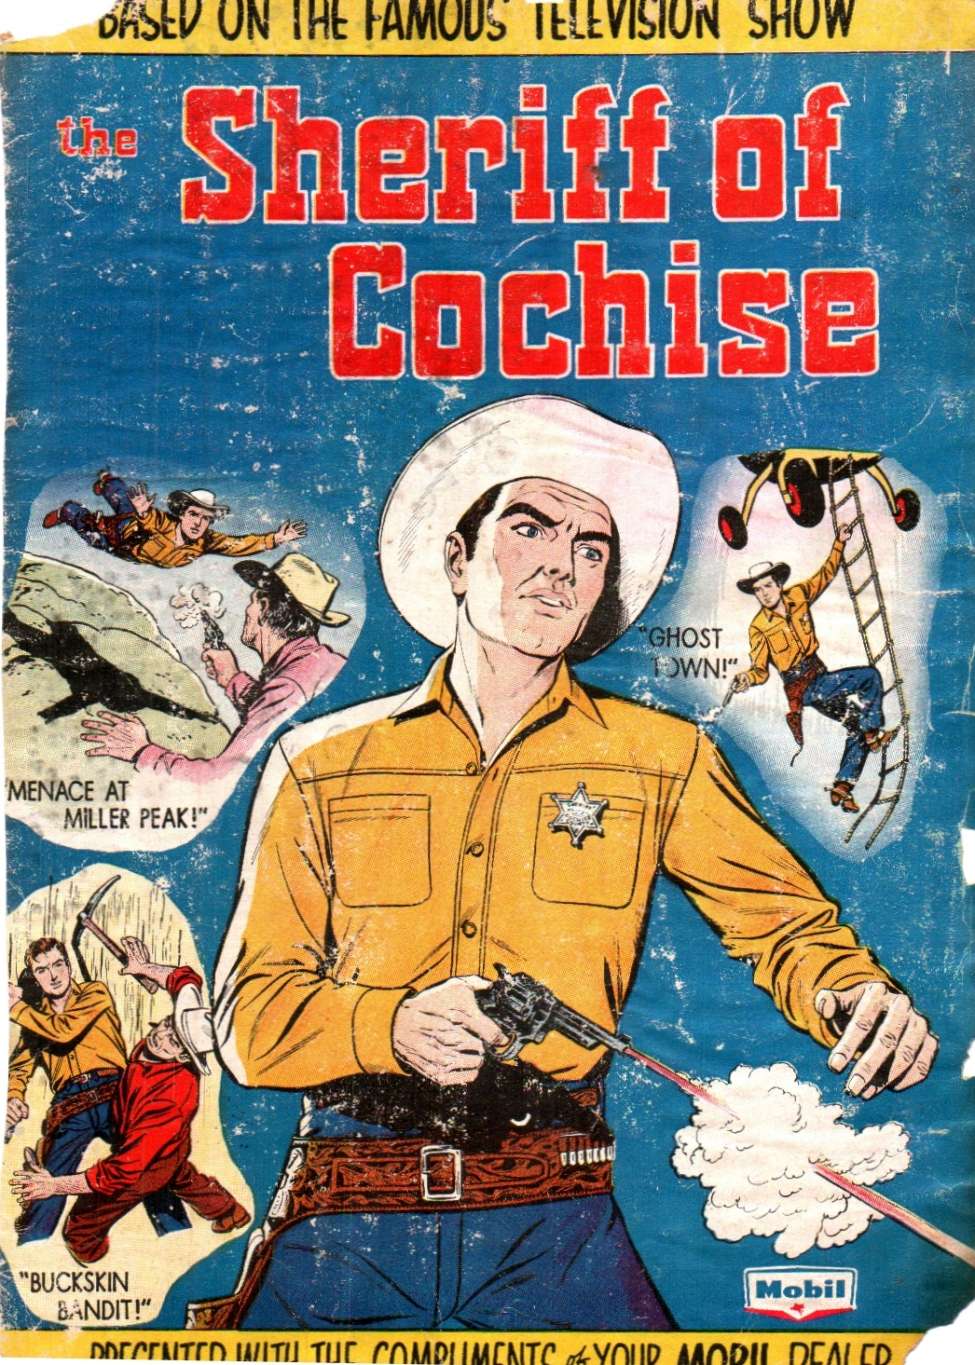 Book Cover For Sheriff of Coshise